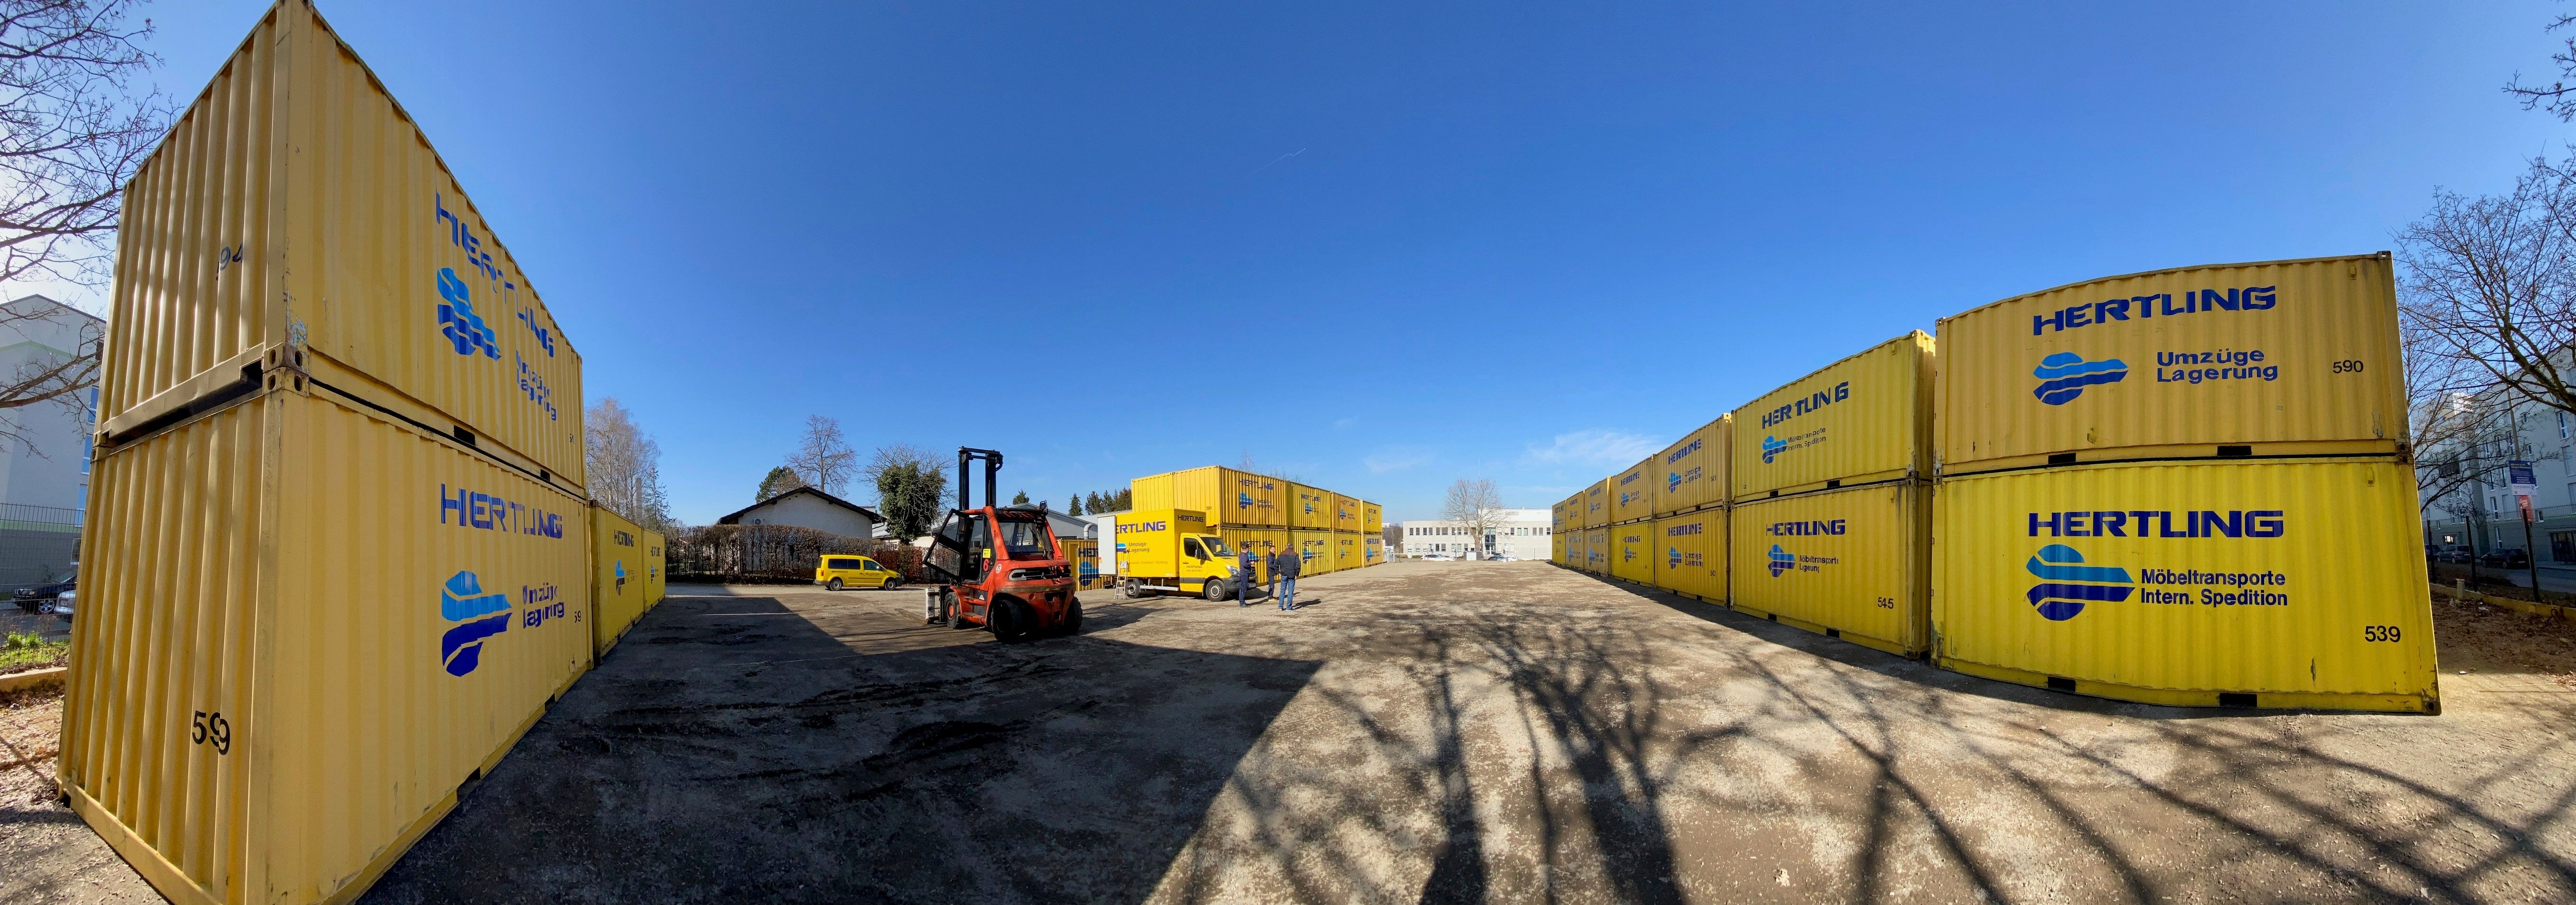 New container yard in Frankfurt am Main